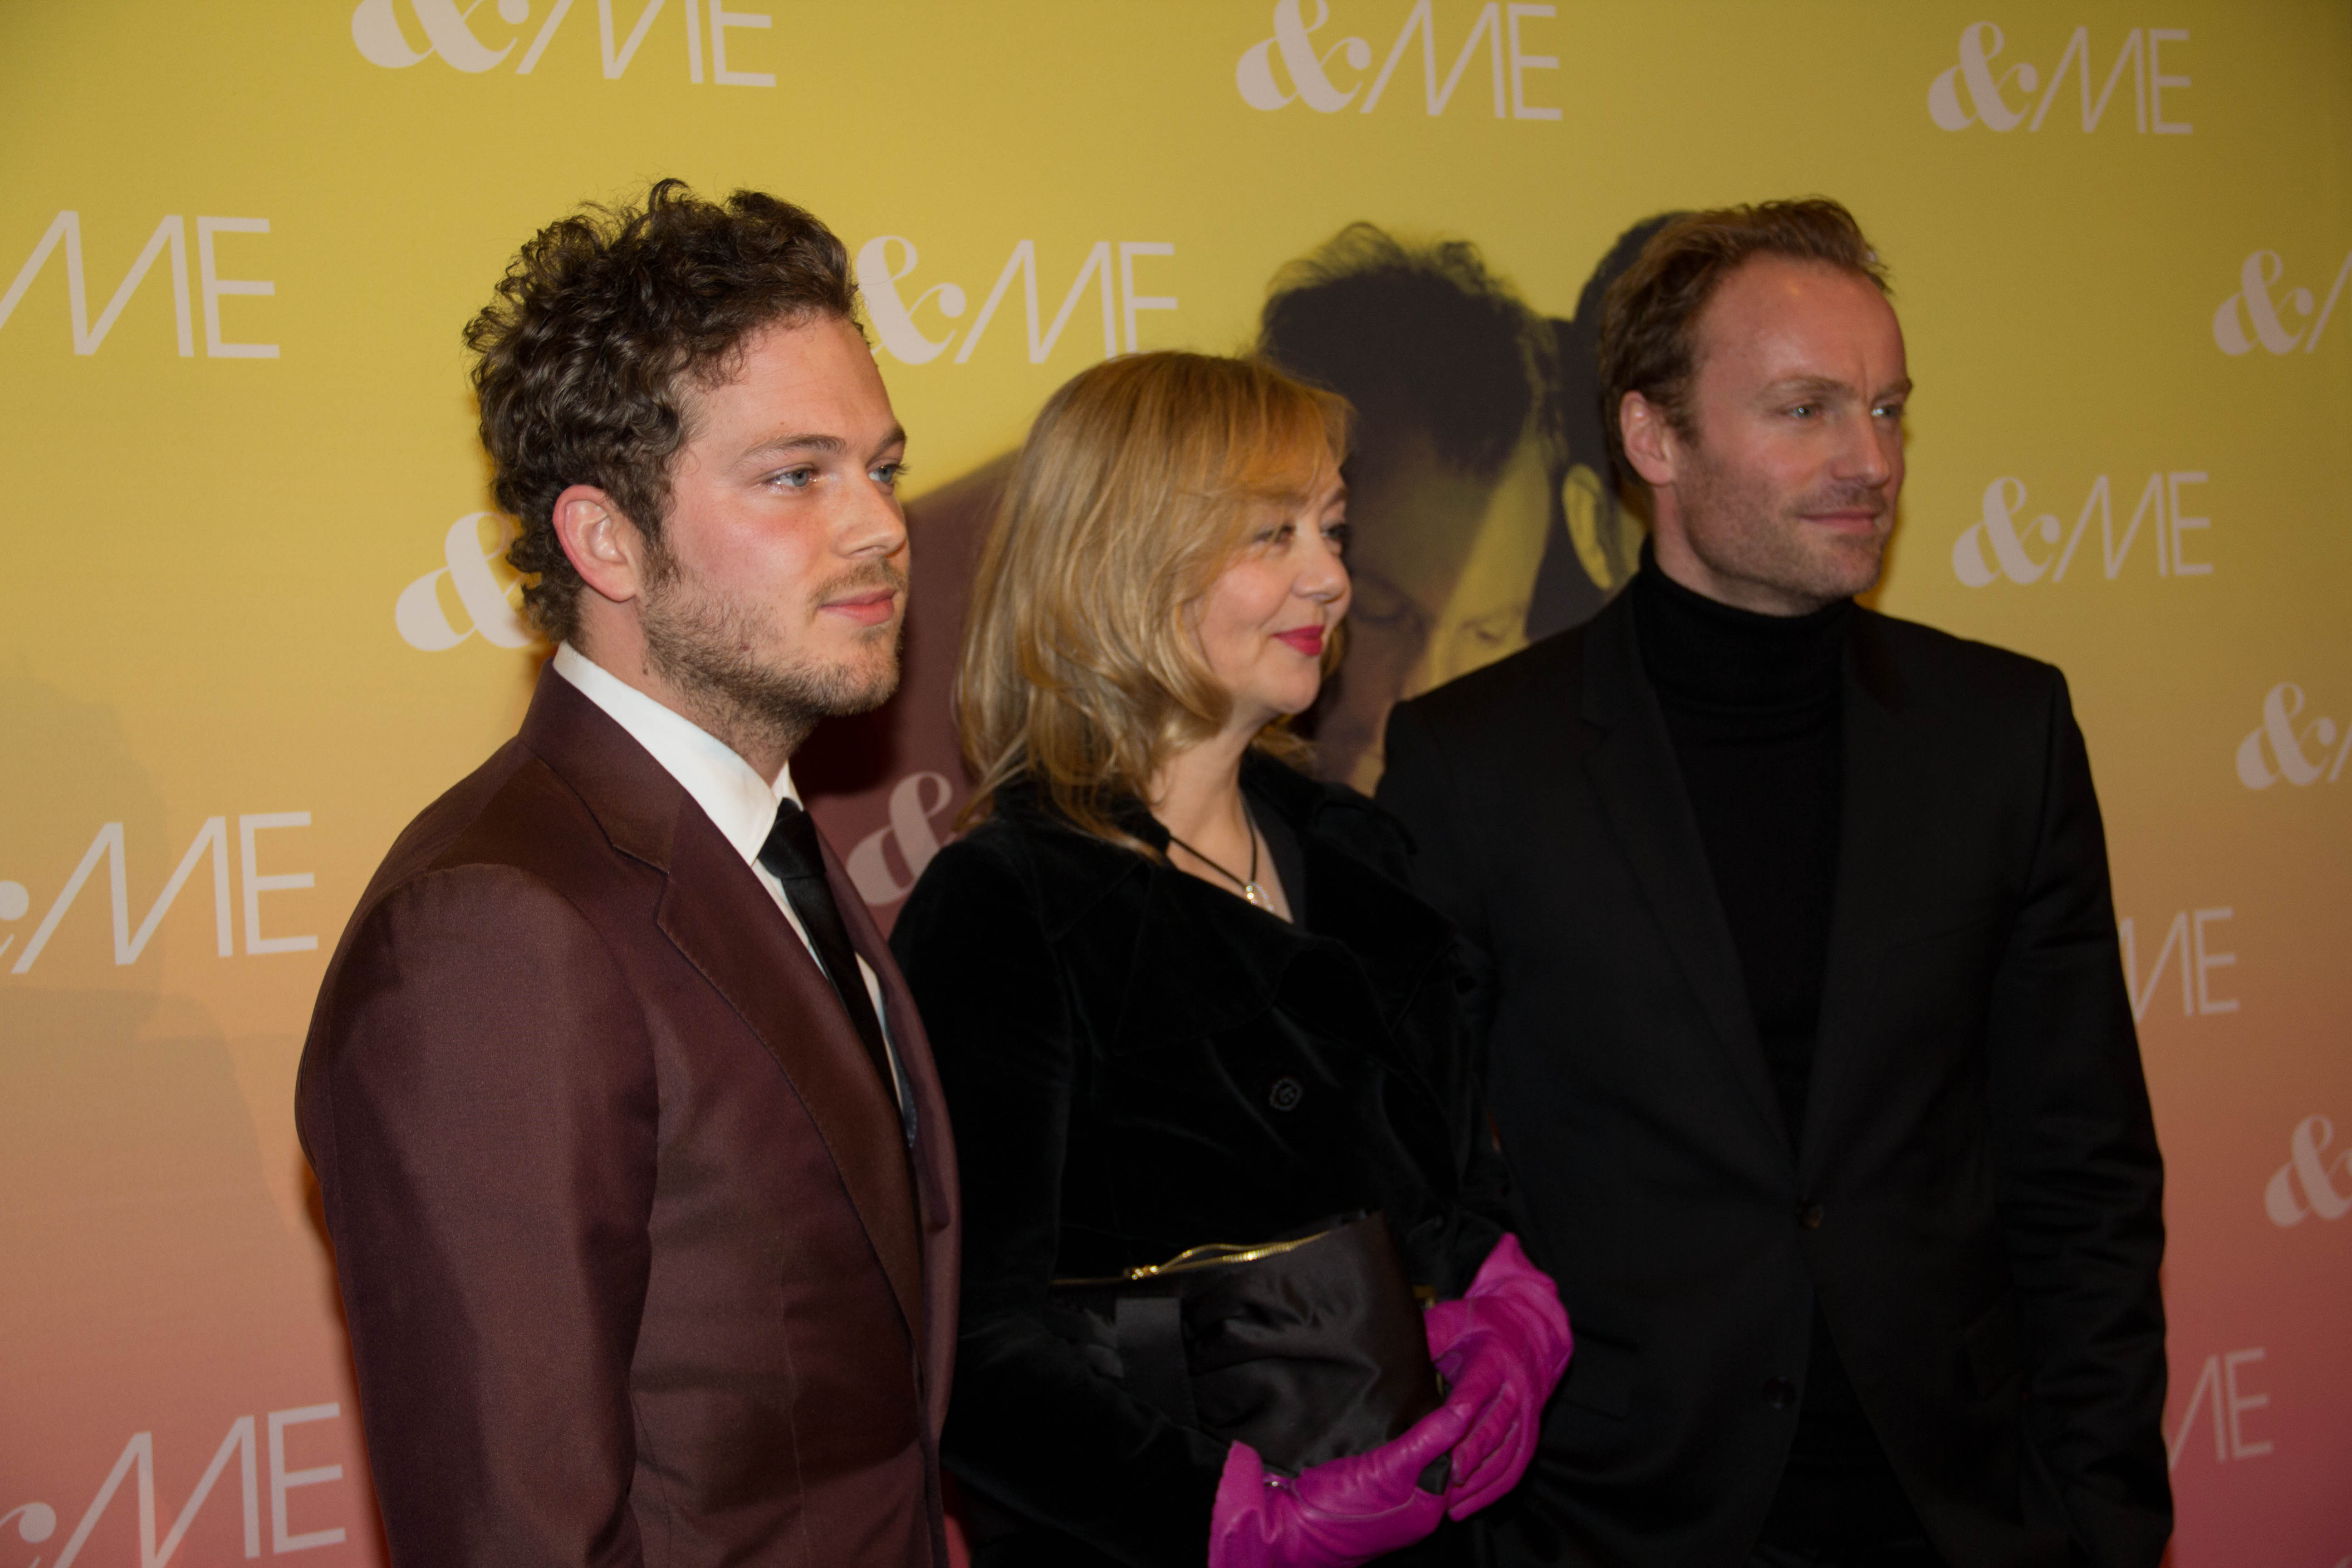 With Pamela Knaack and Mark Waschke at the premiere of '&ME'